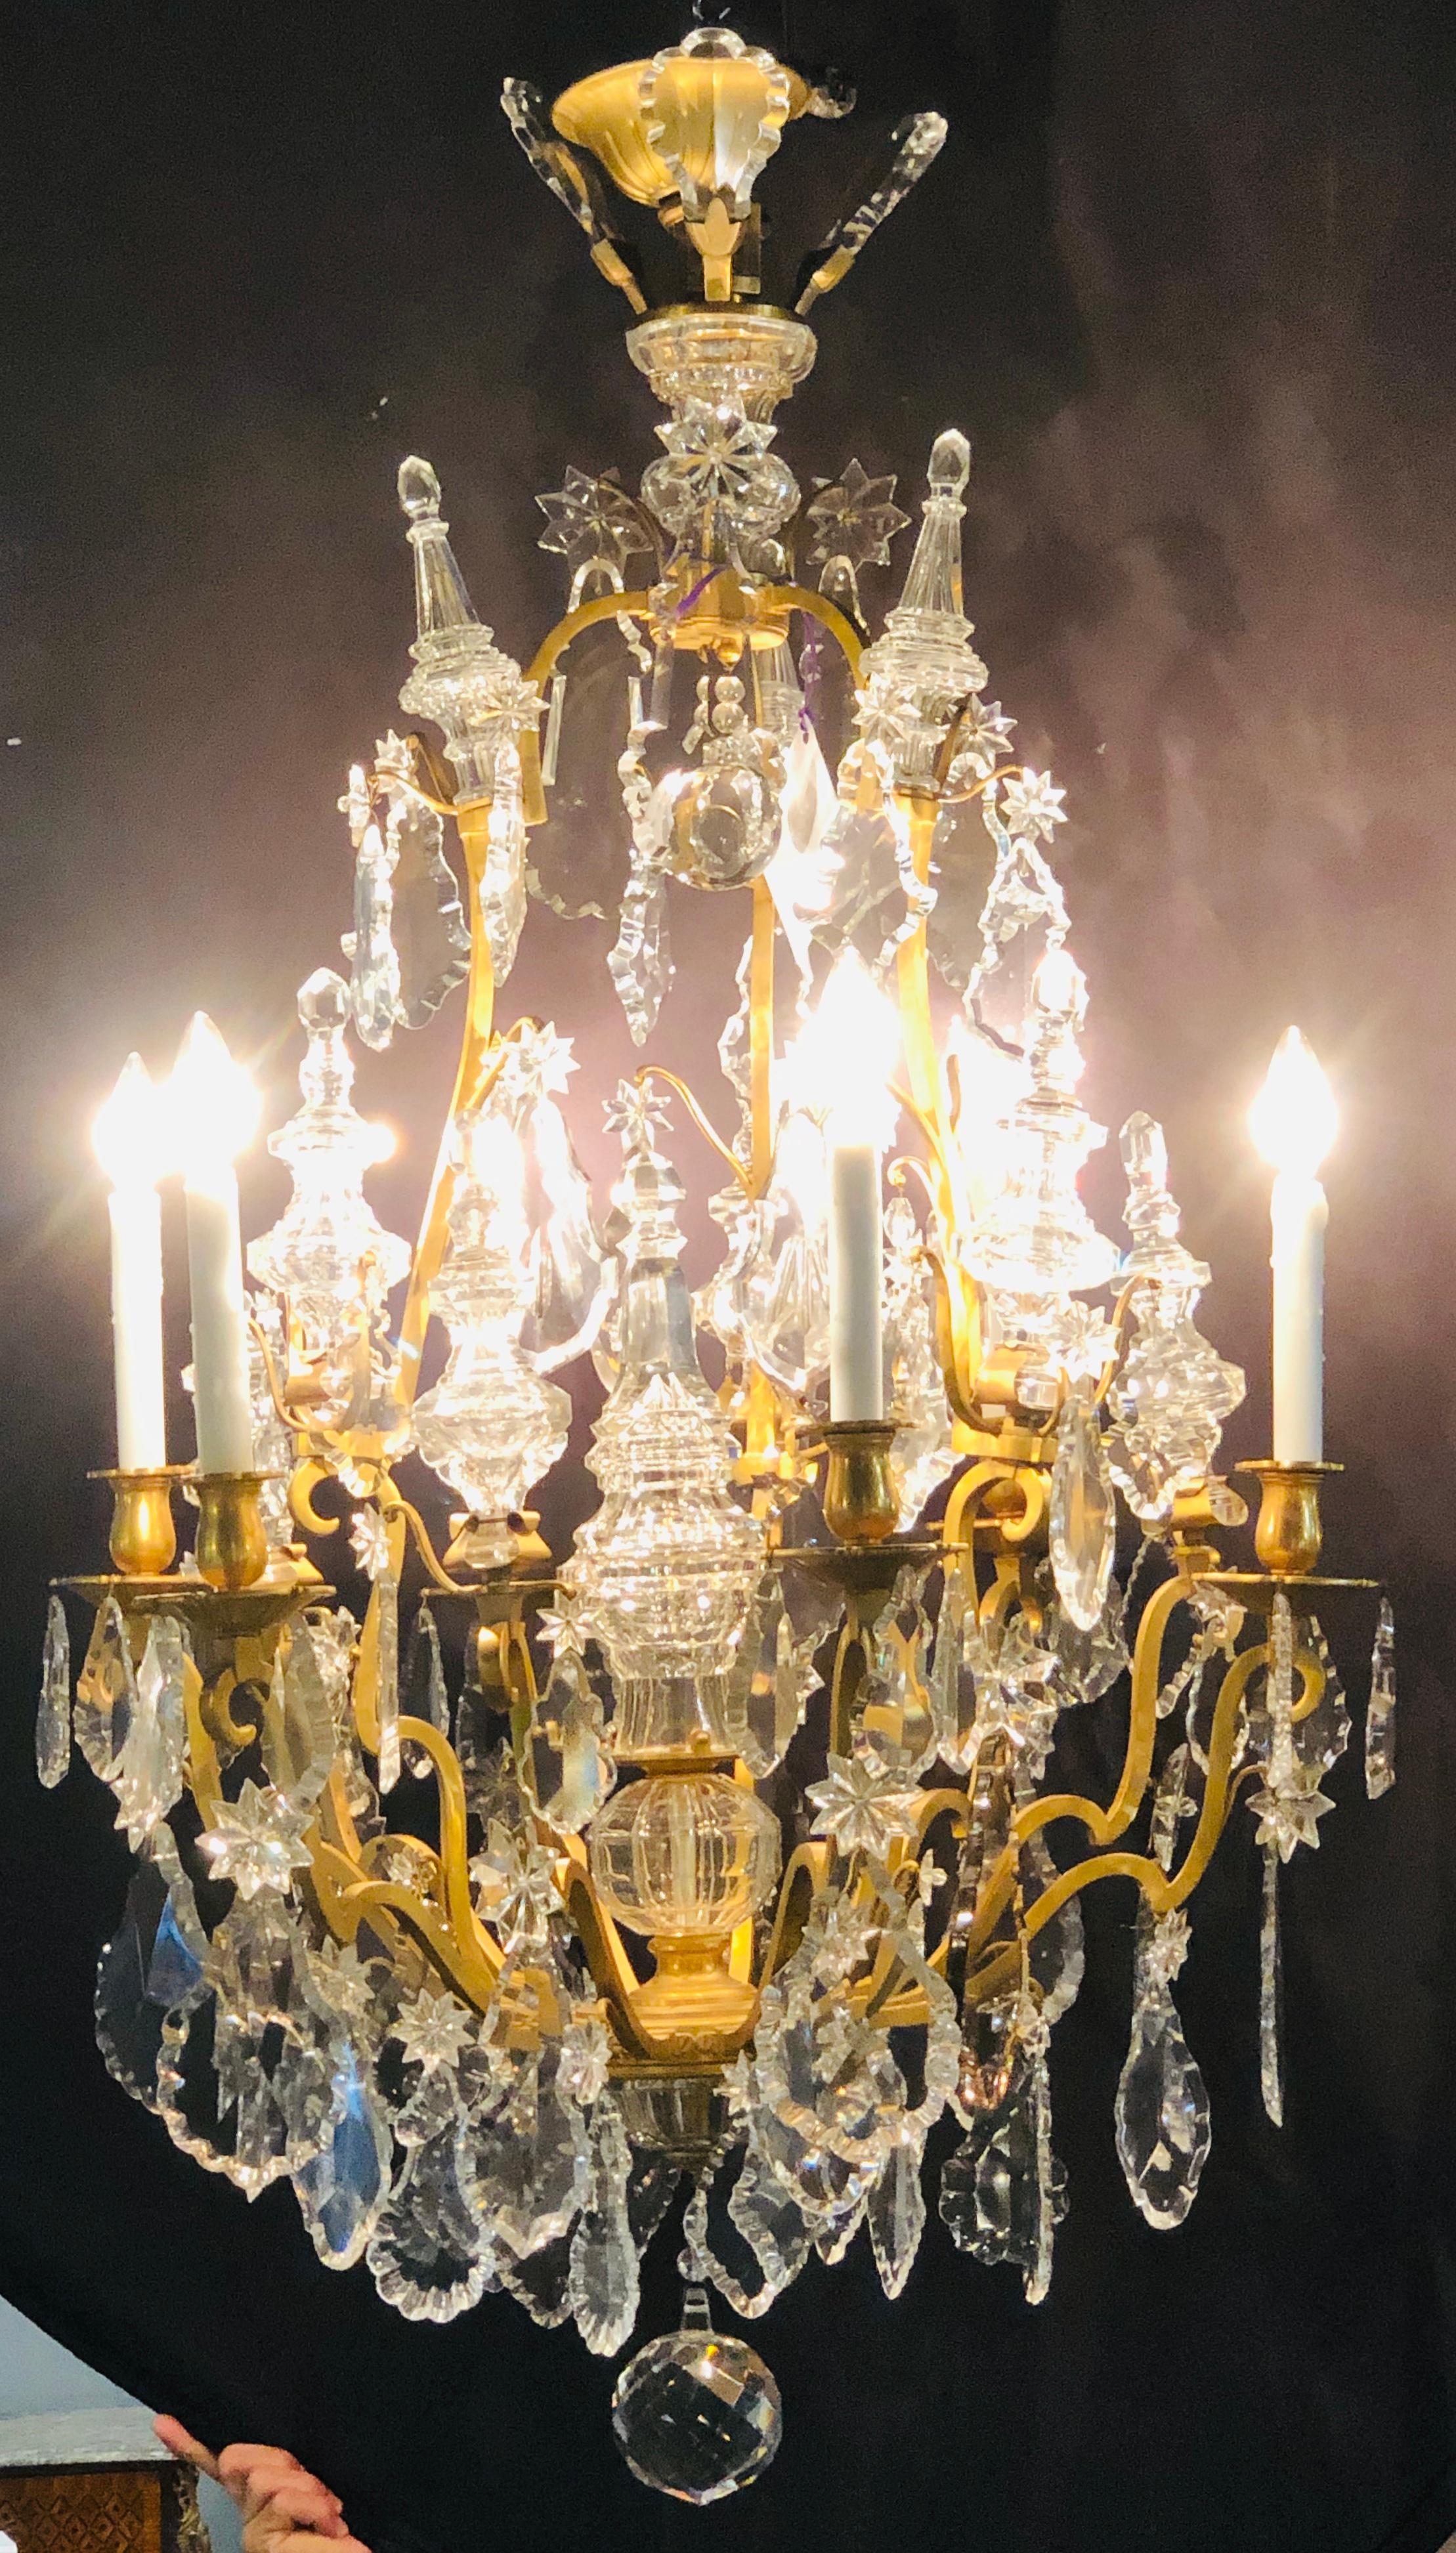 19th century bronze and large crystal palatial chandelier. A monumental impressive chandelier of bronze form with center glass column-form and large glass prisms. The style and form of this one of a kind chandelier is simply stunning with to much to